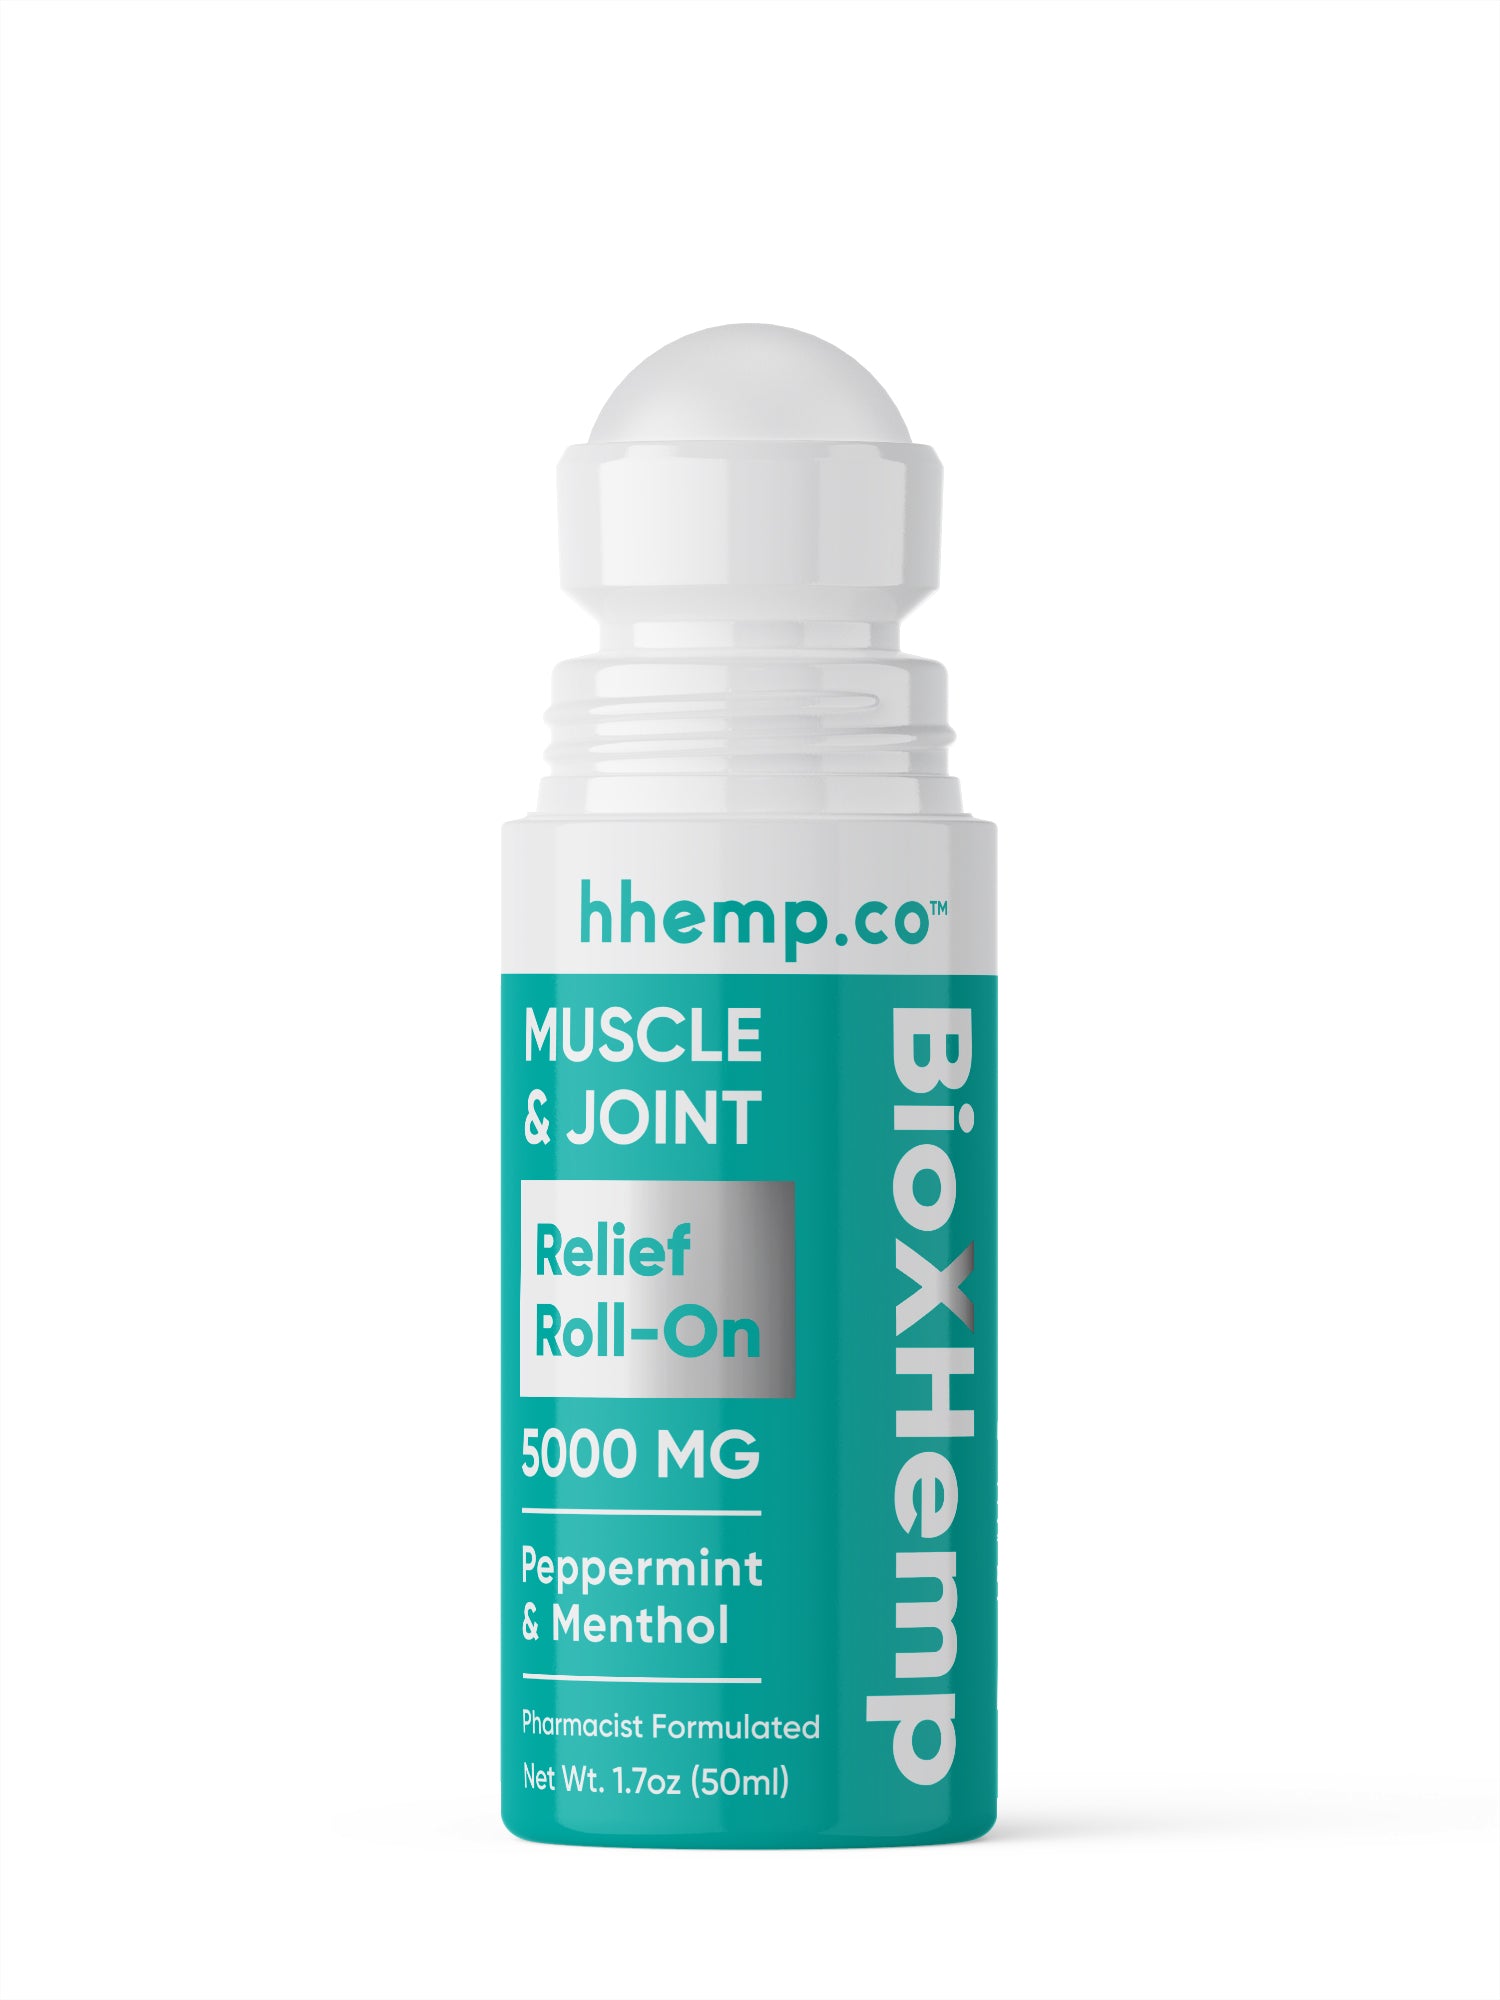 BioXHemp Muscle & Joint Relief Roll-On - Peppermint and Menthol (5,000mg)